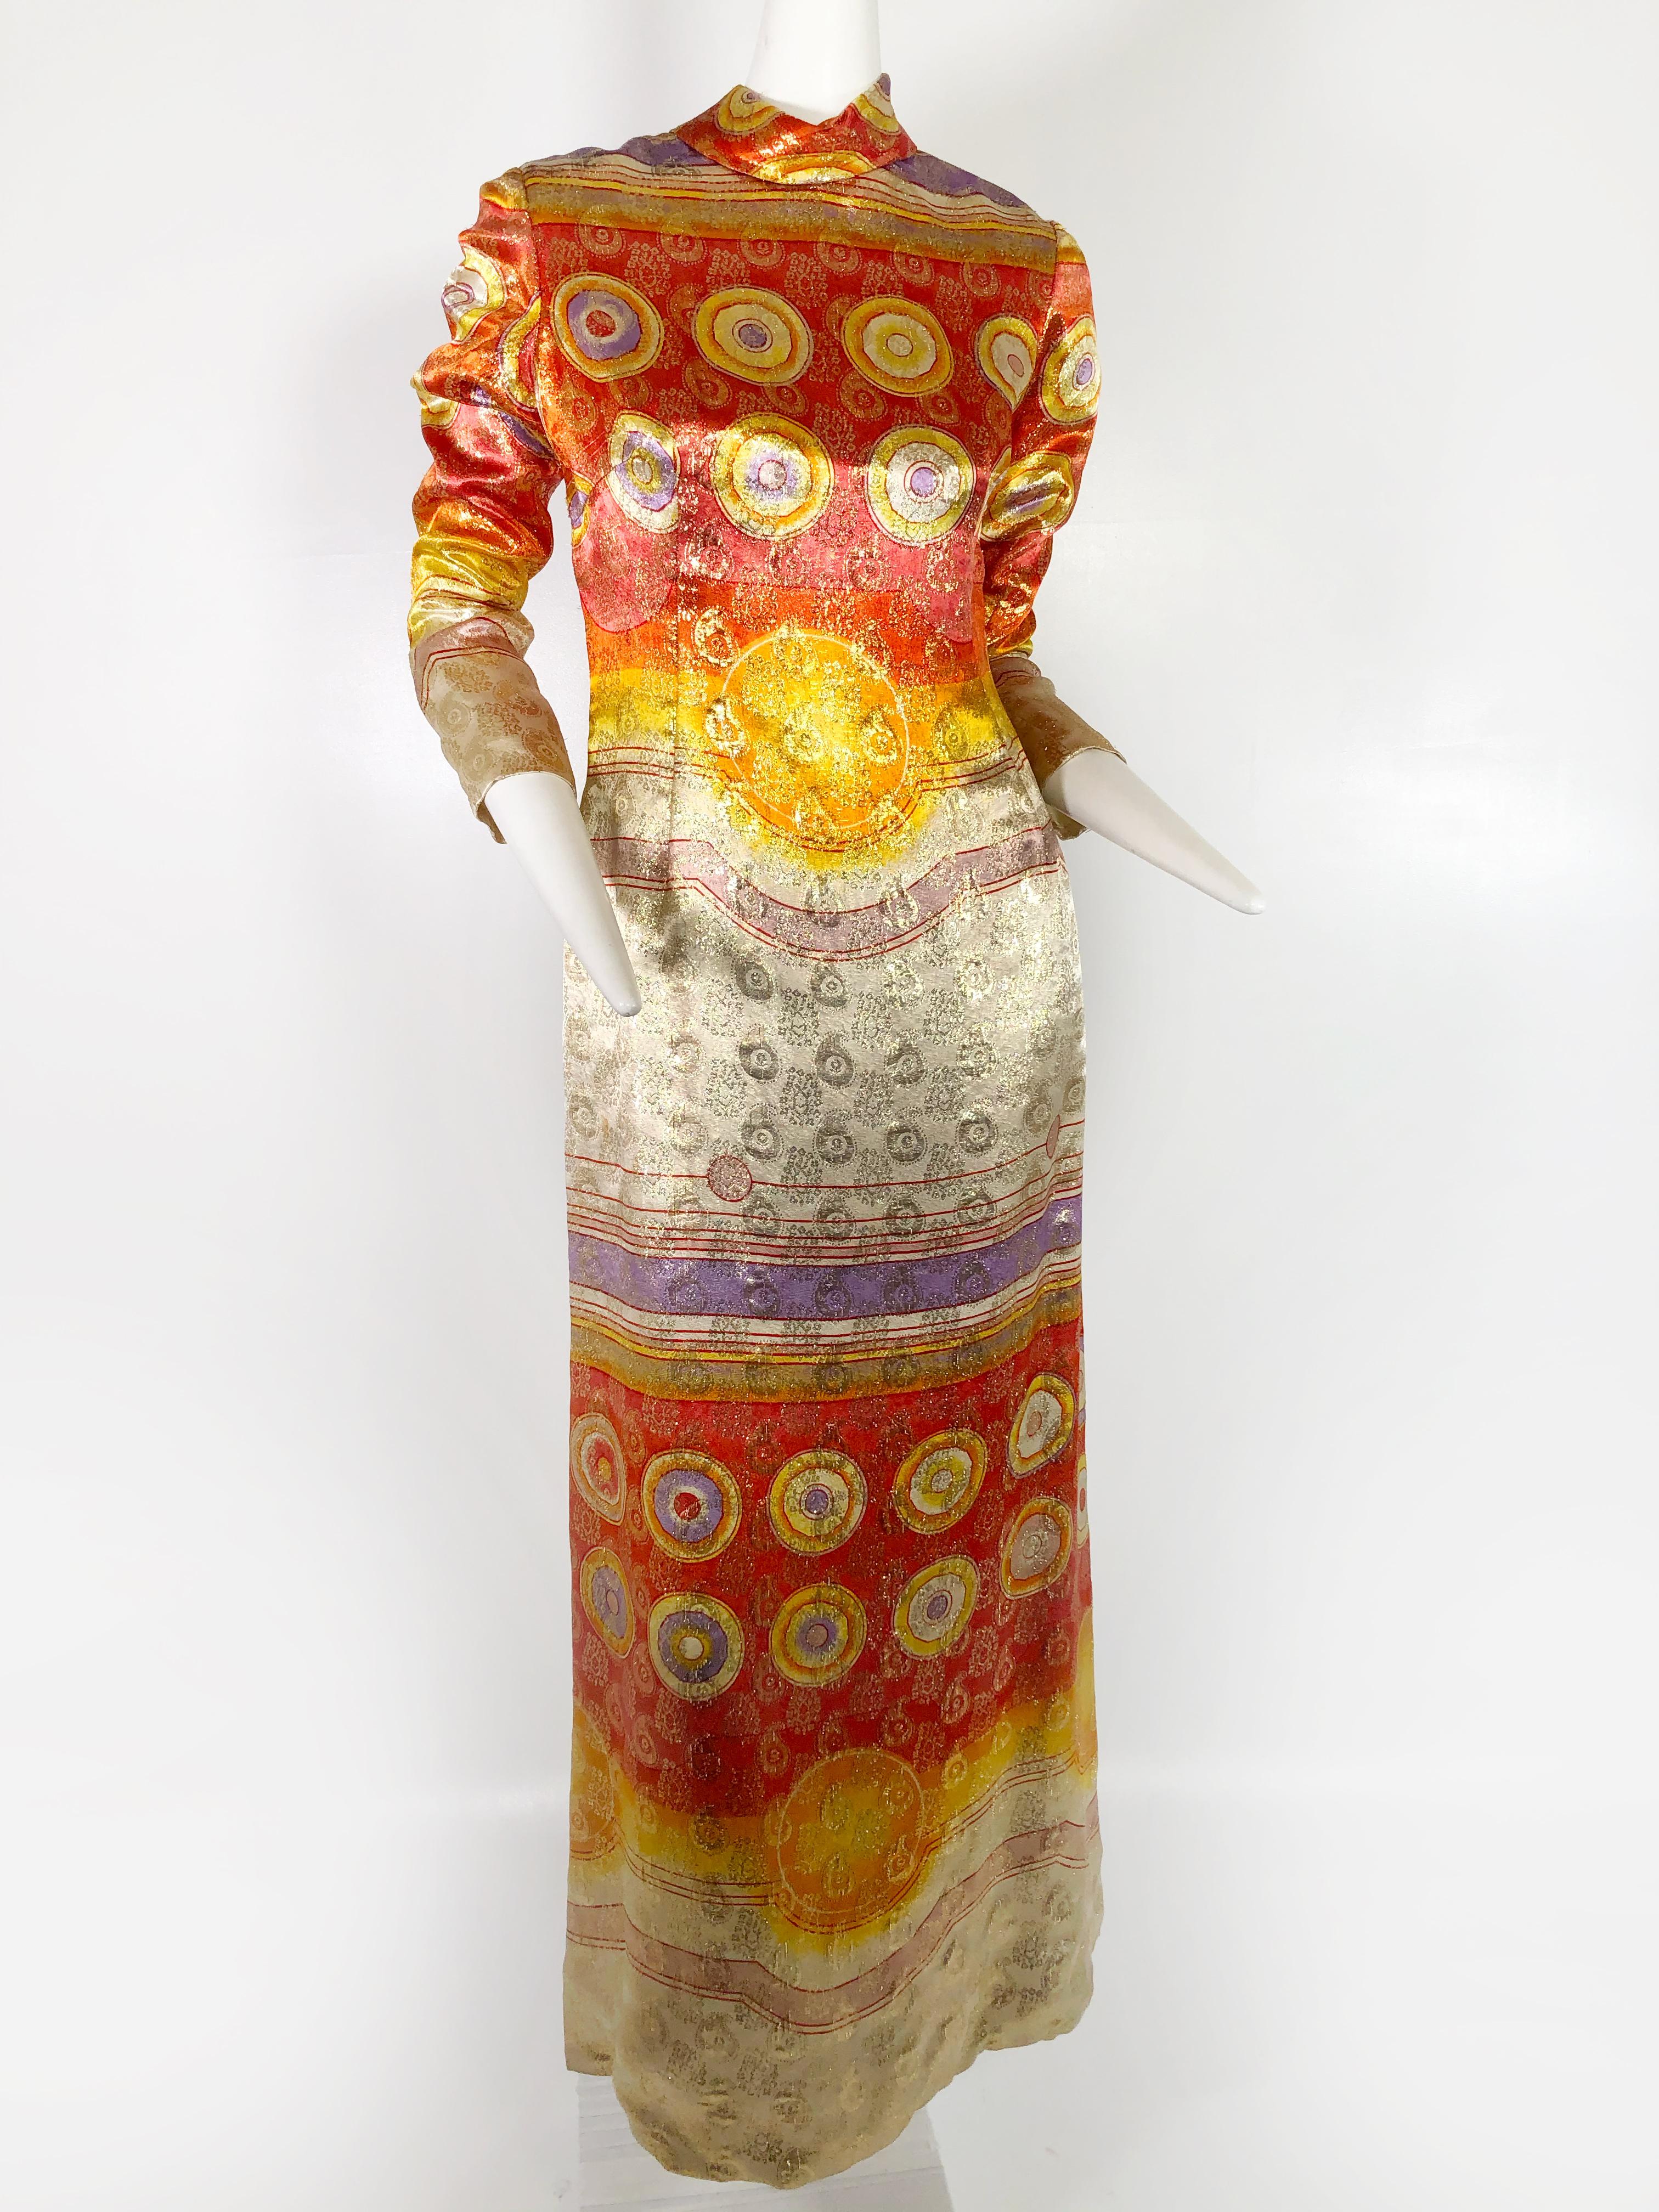 A 1960s Malcolm Starr lame maxi dress or gown with a groovy medallion pattern executed in orange, red, purple and white with metallics. With a banded collar and back zipper.  An easy fitted shift style.   